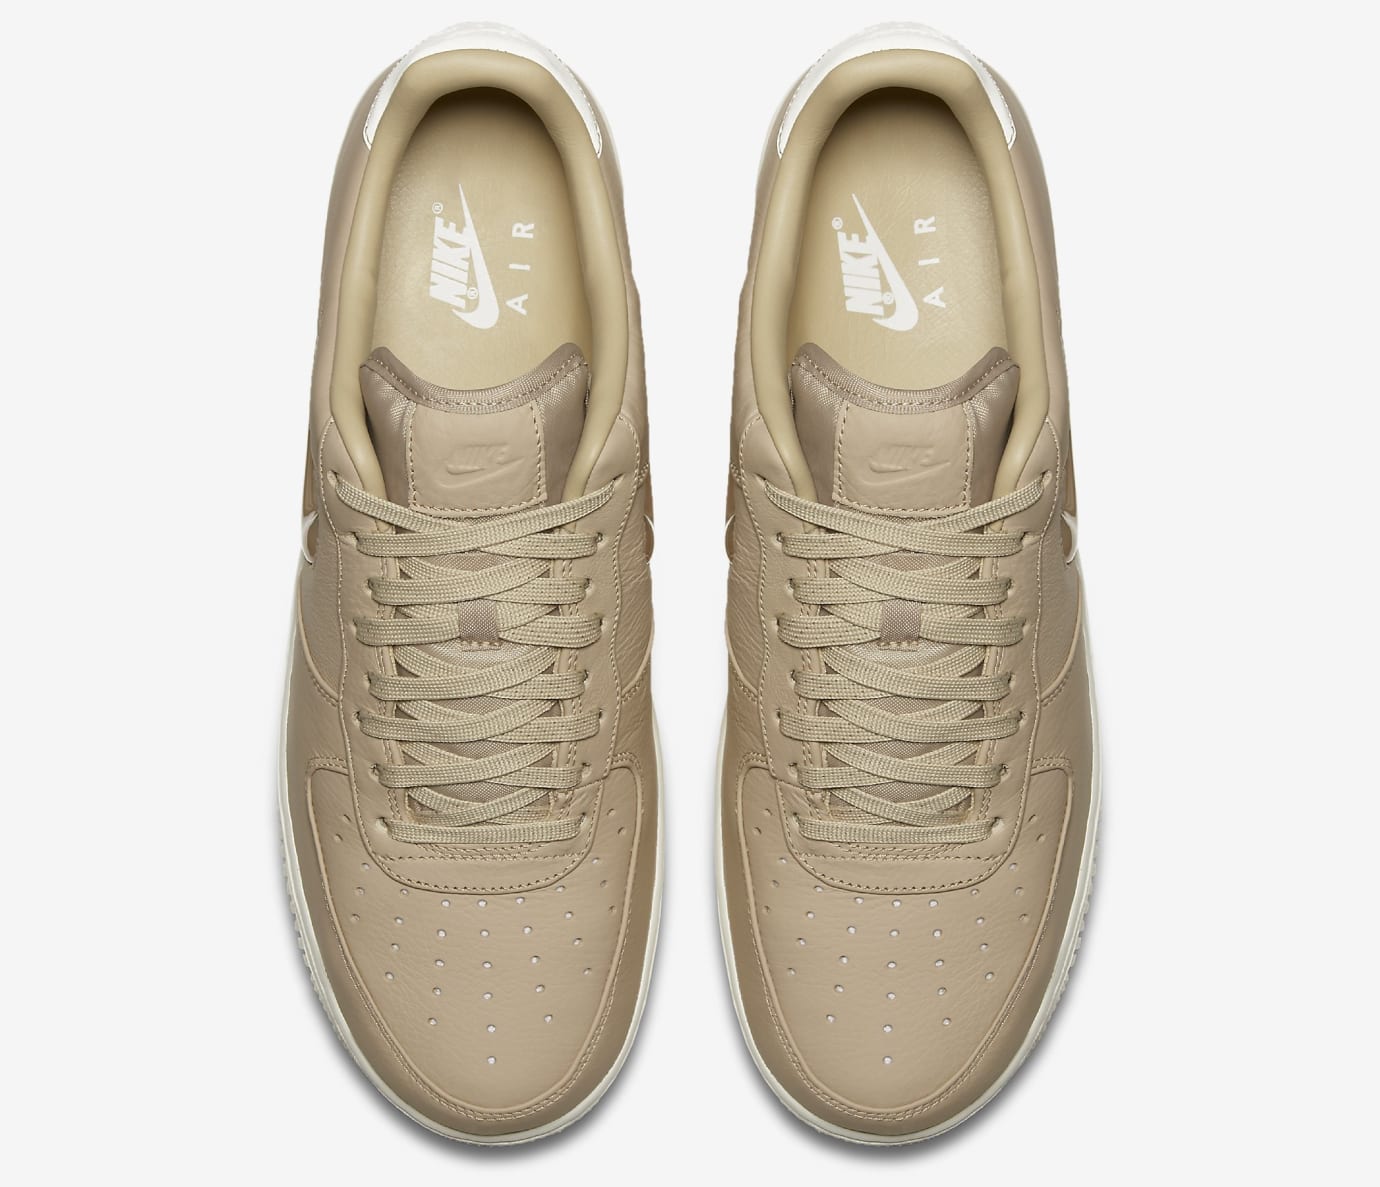 NikeLab Air Force 1 Jewel Mids and Lows | Sole Collector